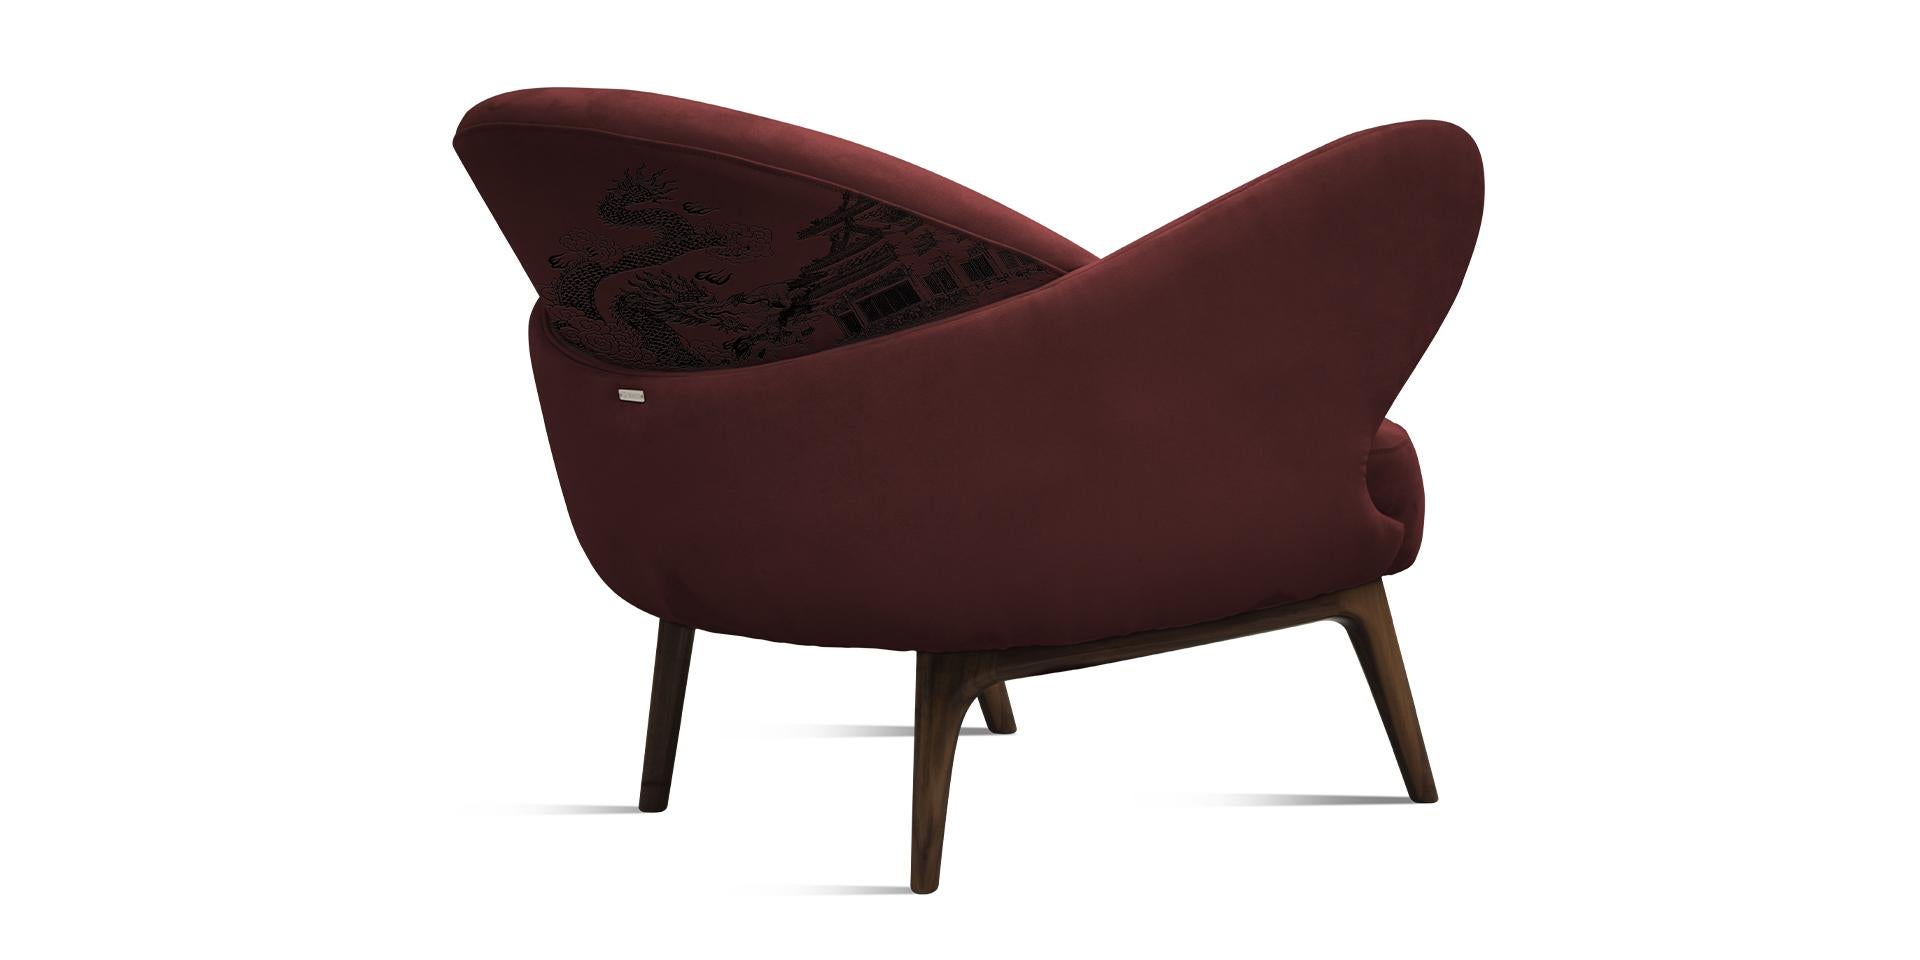 The Cinnabar armchair resorts to one of the most beautiful known technique: the embroidery. Highlighting the detailed pattern through line and dot details, until the walnut wood legs. Cinnabar armchair is a wonderful way to excite a desire for